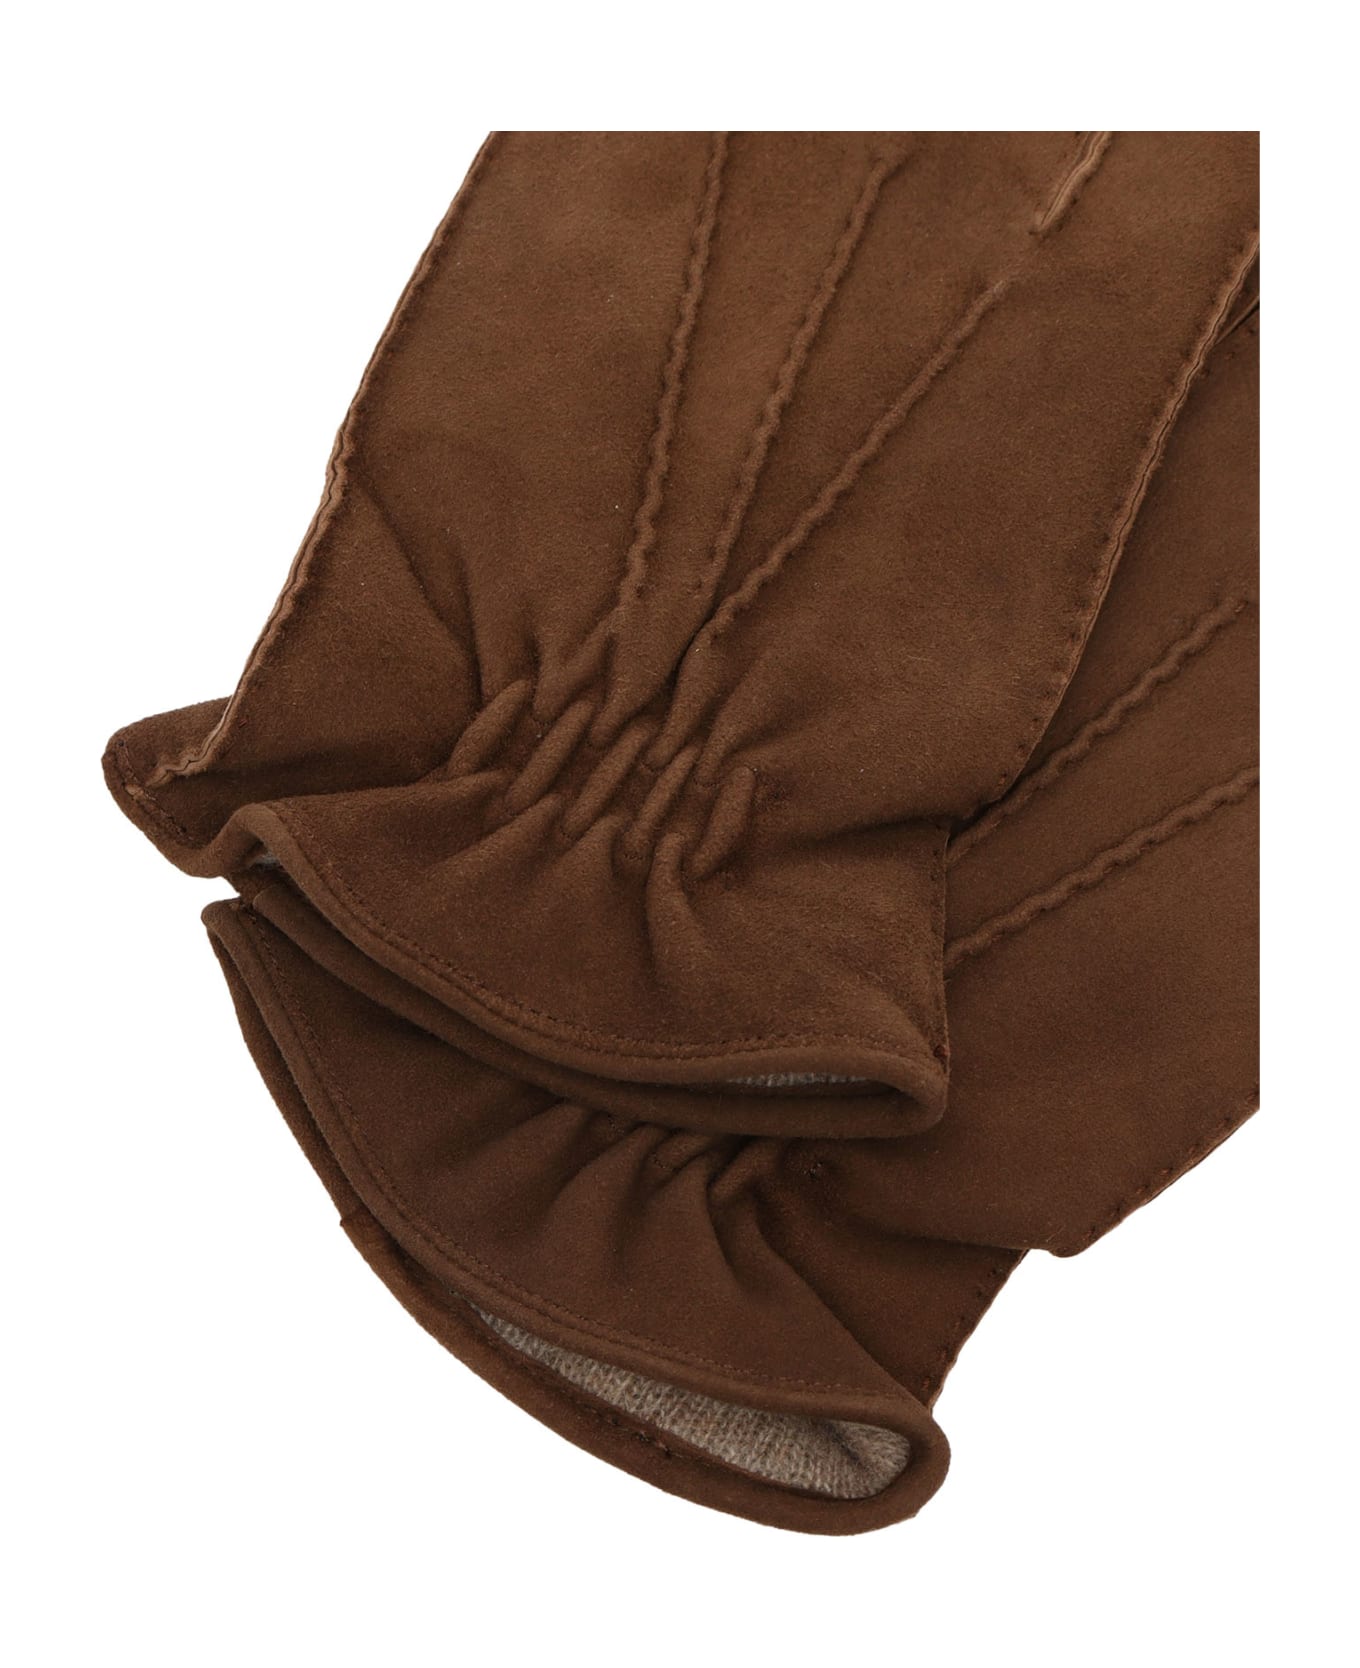 Orciani Suede Gloves - BROWN